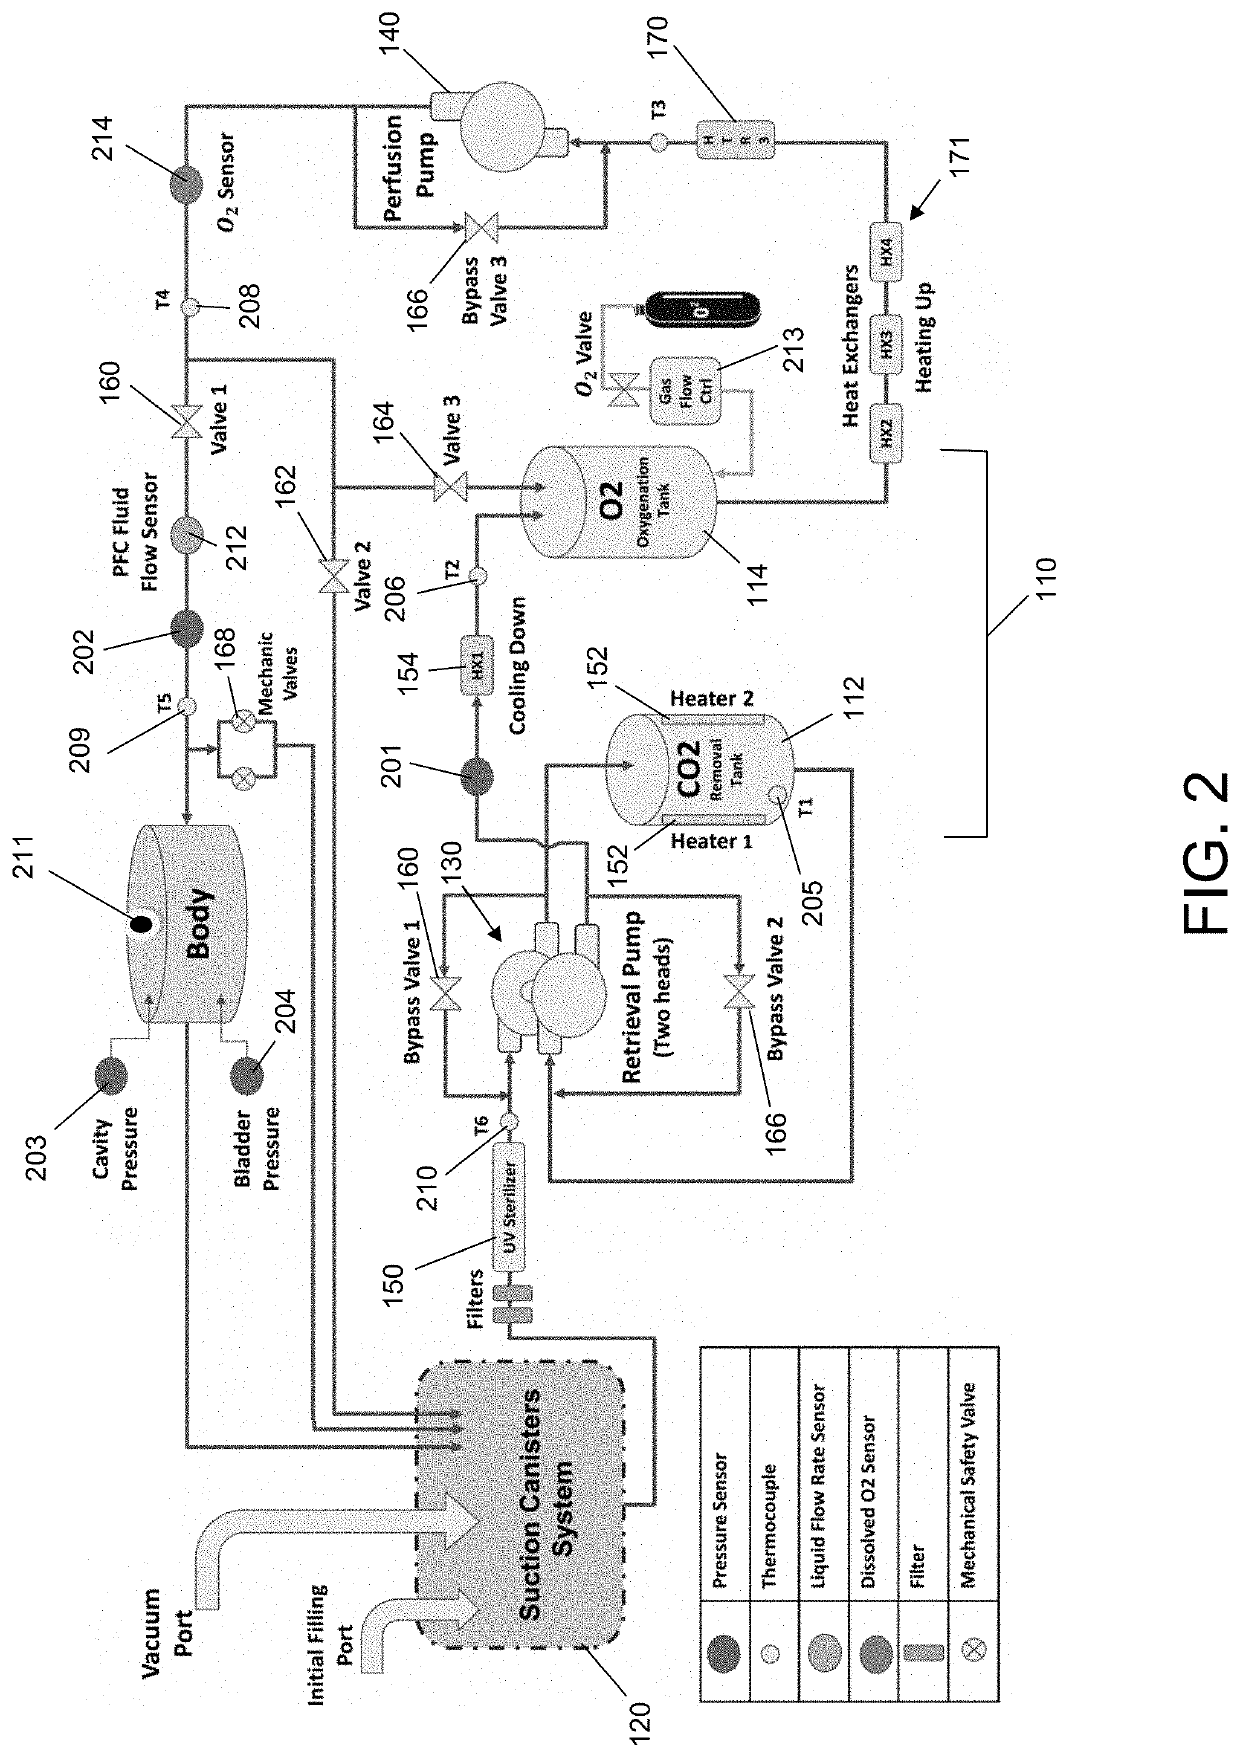 Peritoneal oxygenation system and method